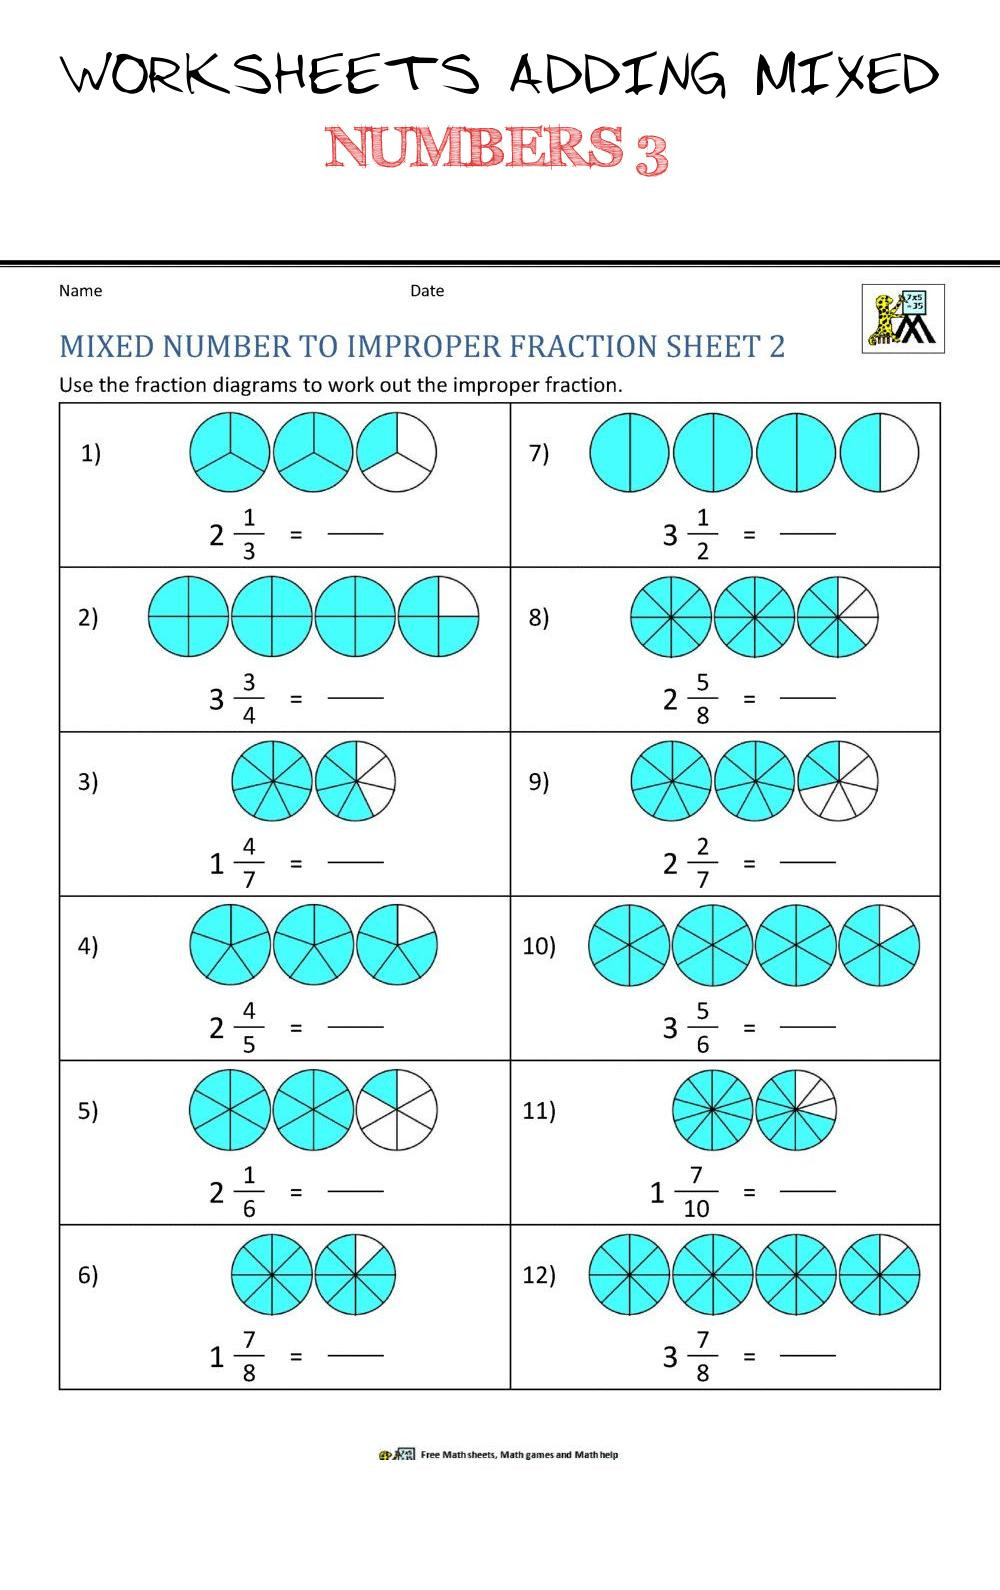 Adding Mixed Numbers Worksheet Worksheets Adding Mixed Numbers 3 3 Worksheets Adding Mixed